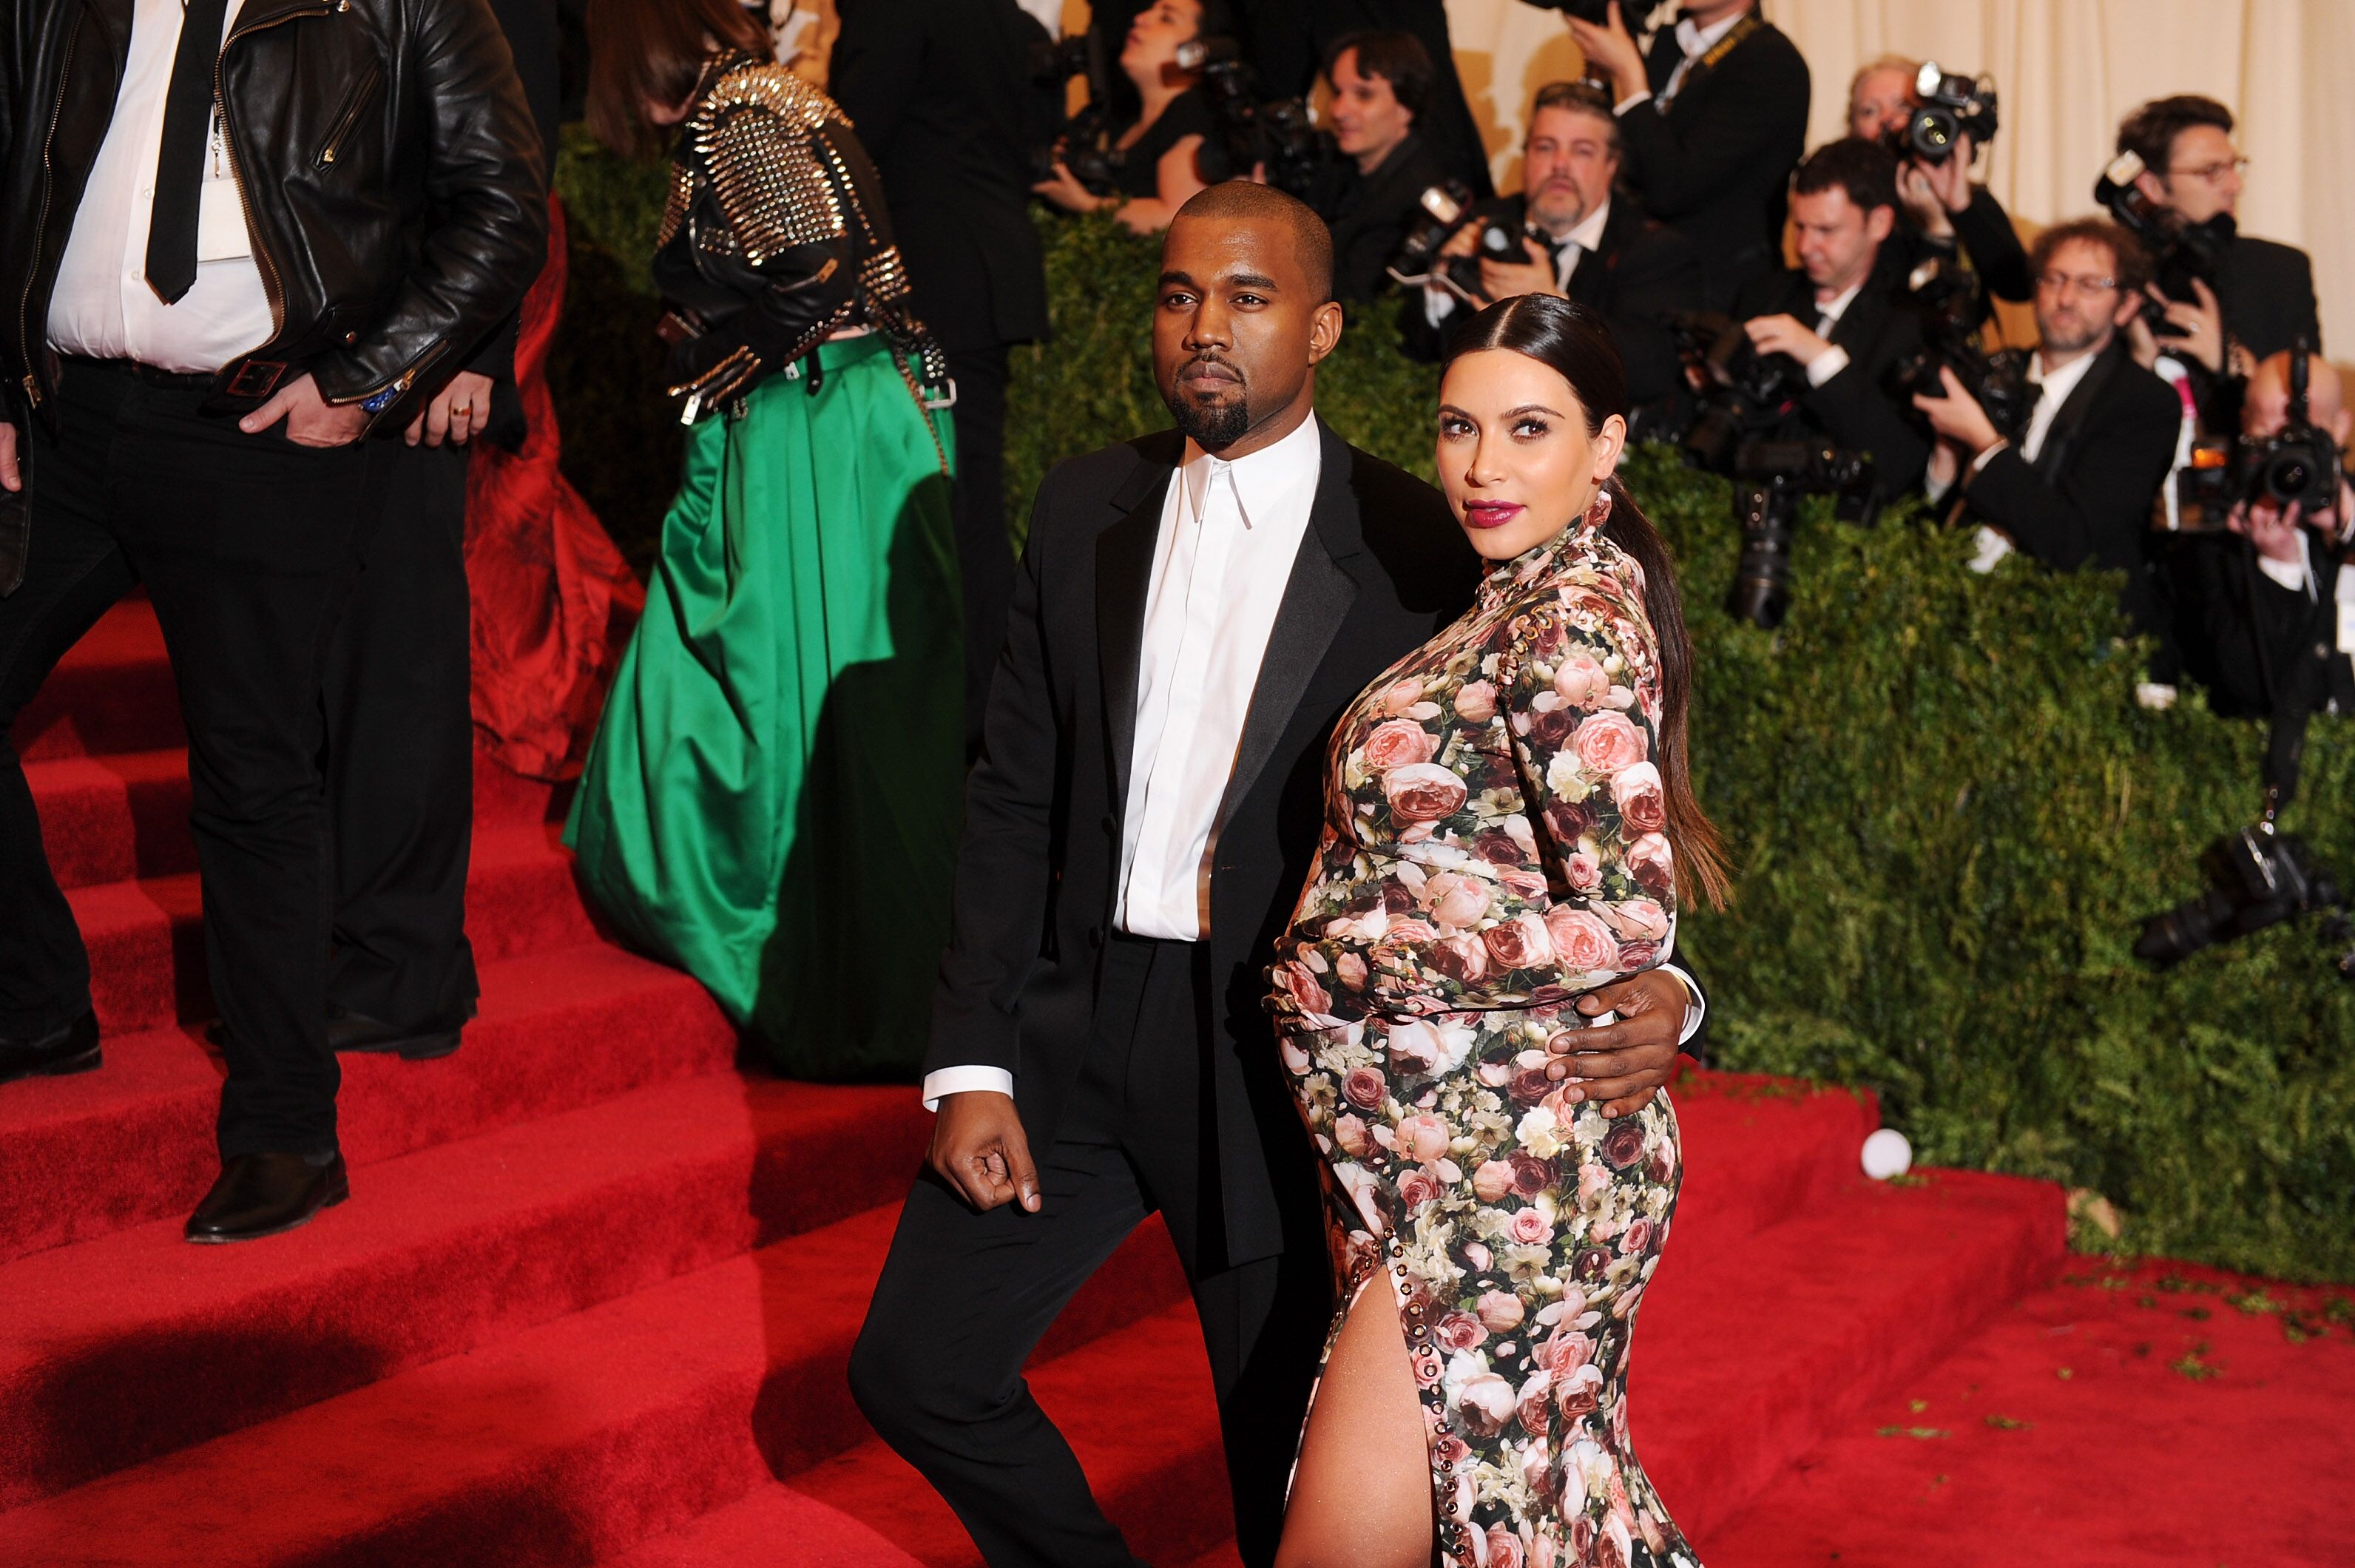 Kanye West and a heavily pregnant Kim Kardashian at the MET Gala/ Source: Getty Images